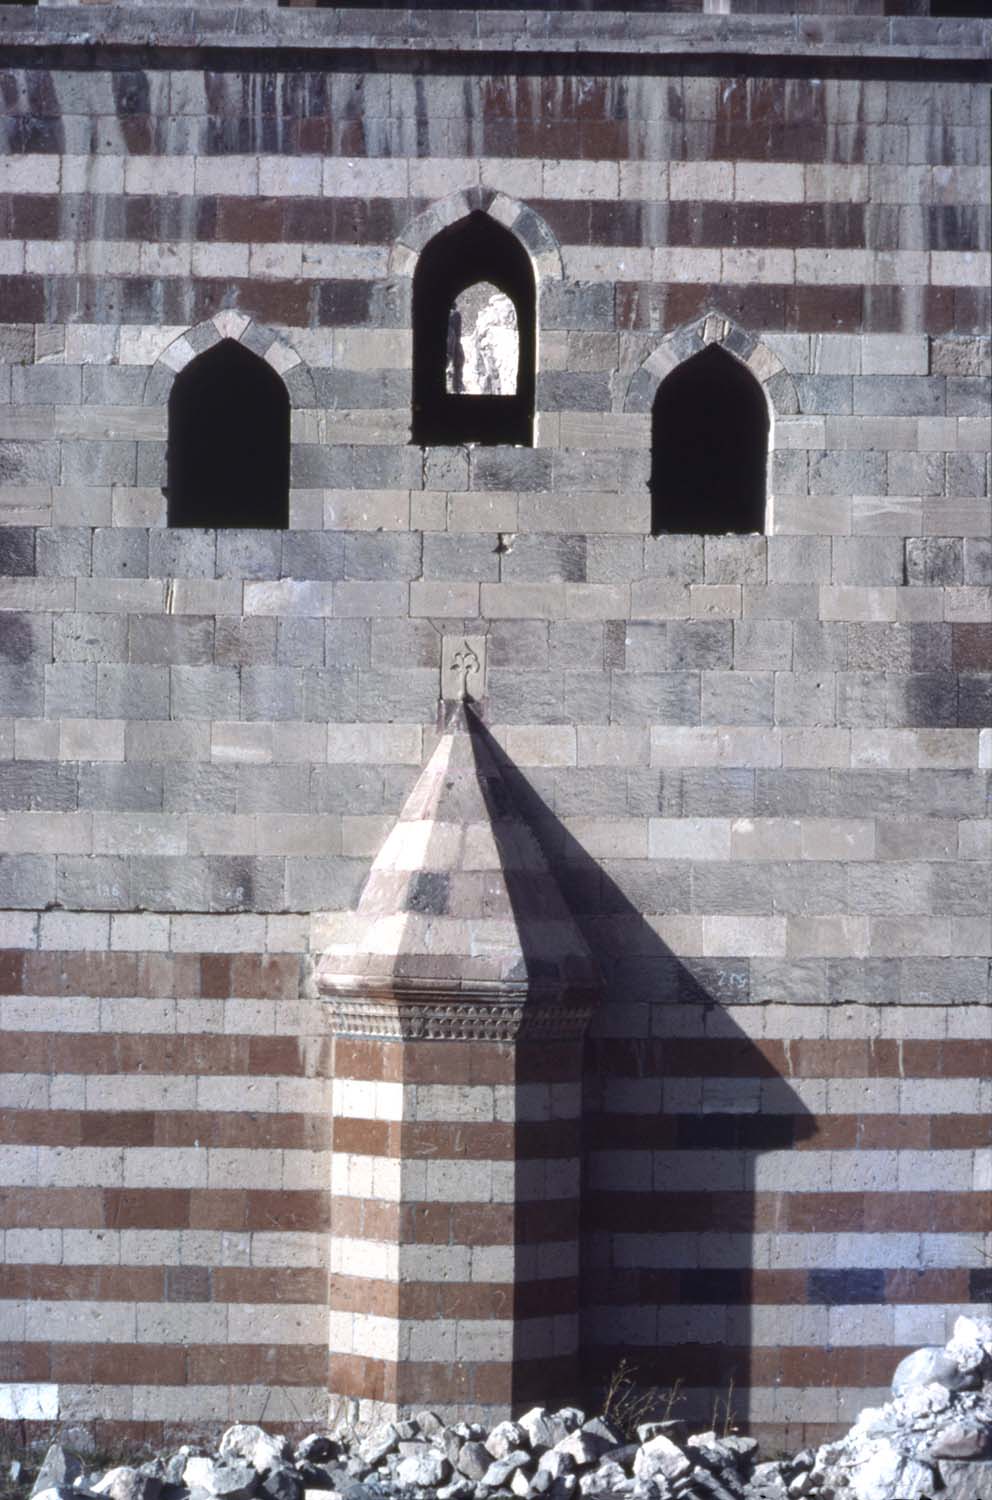 Detail view of exterior, showing use of alternating courses of colored stone masonry (ablaq).